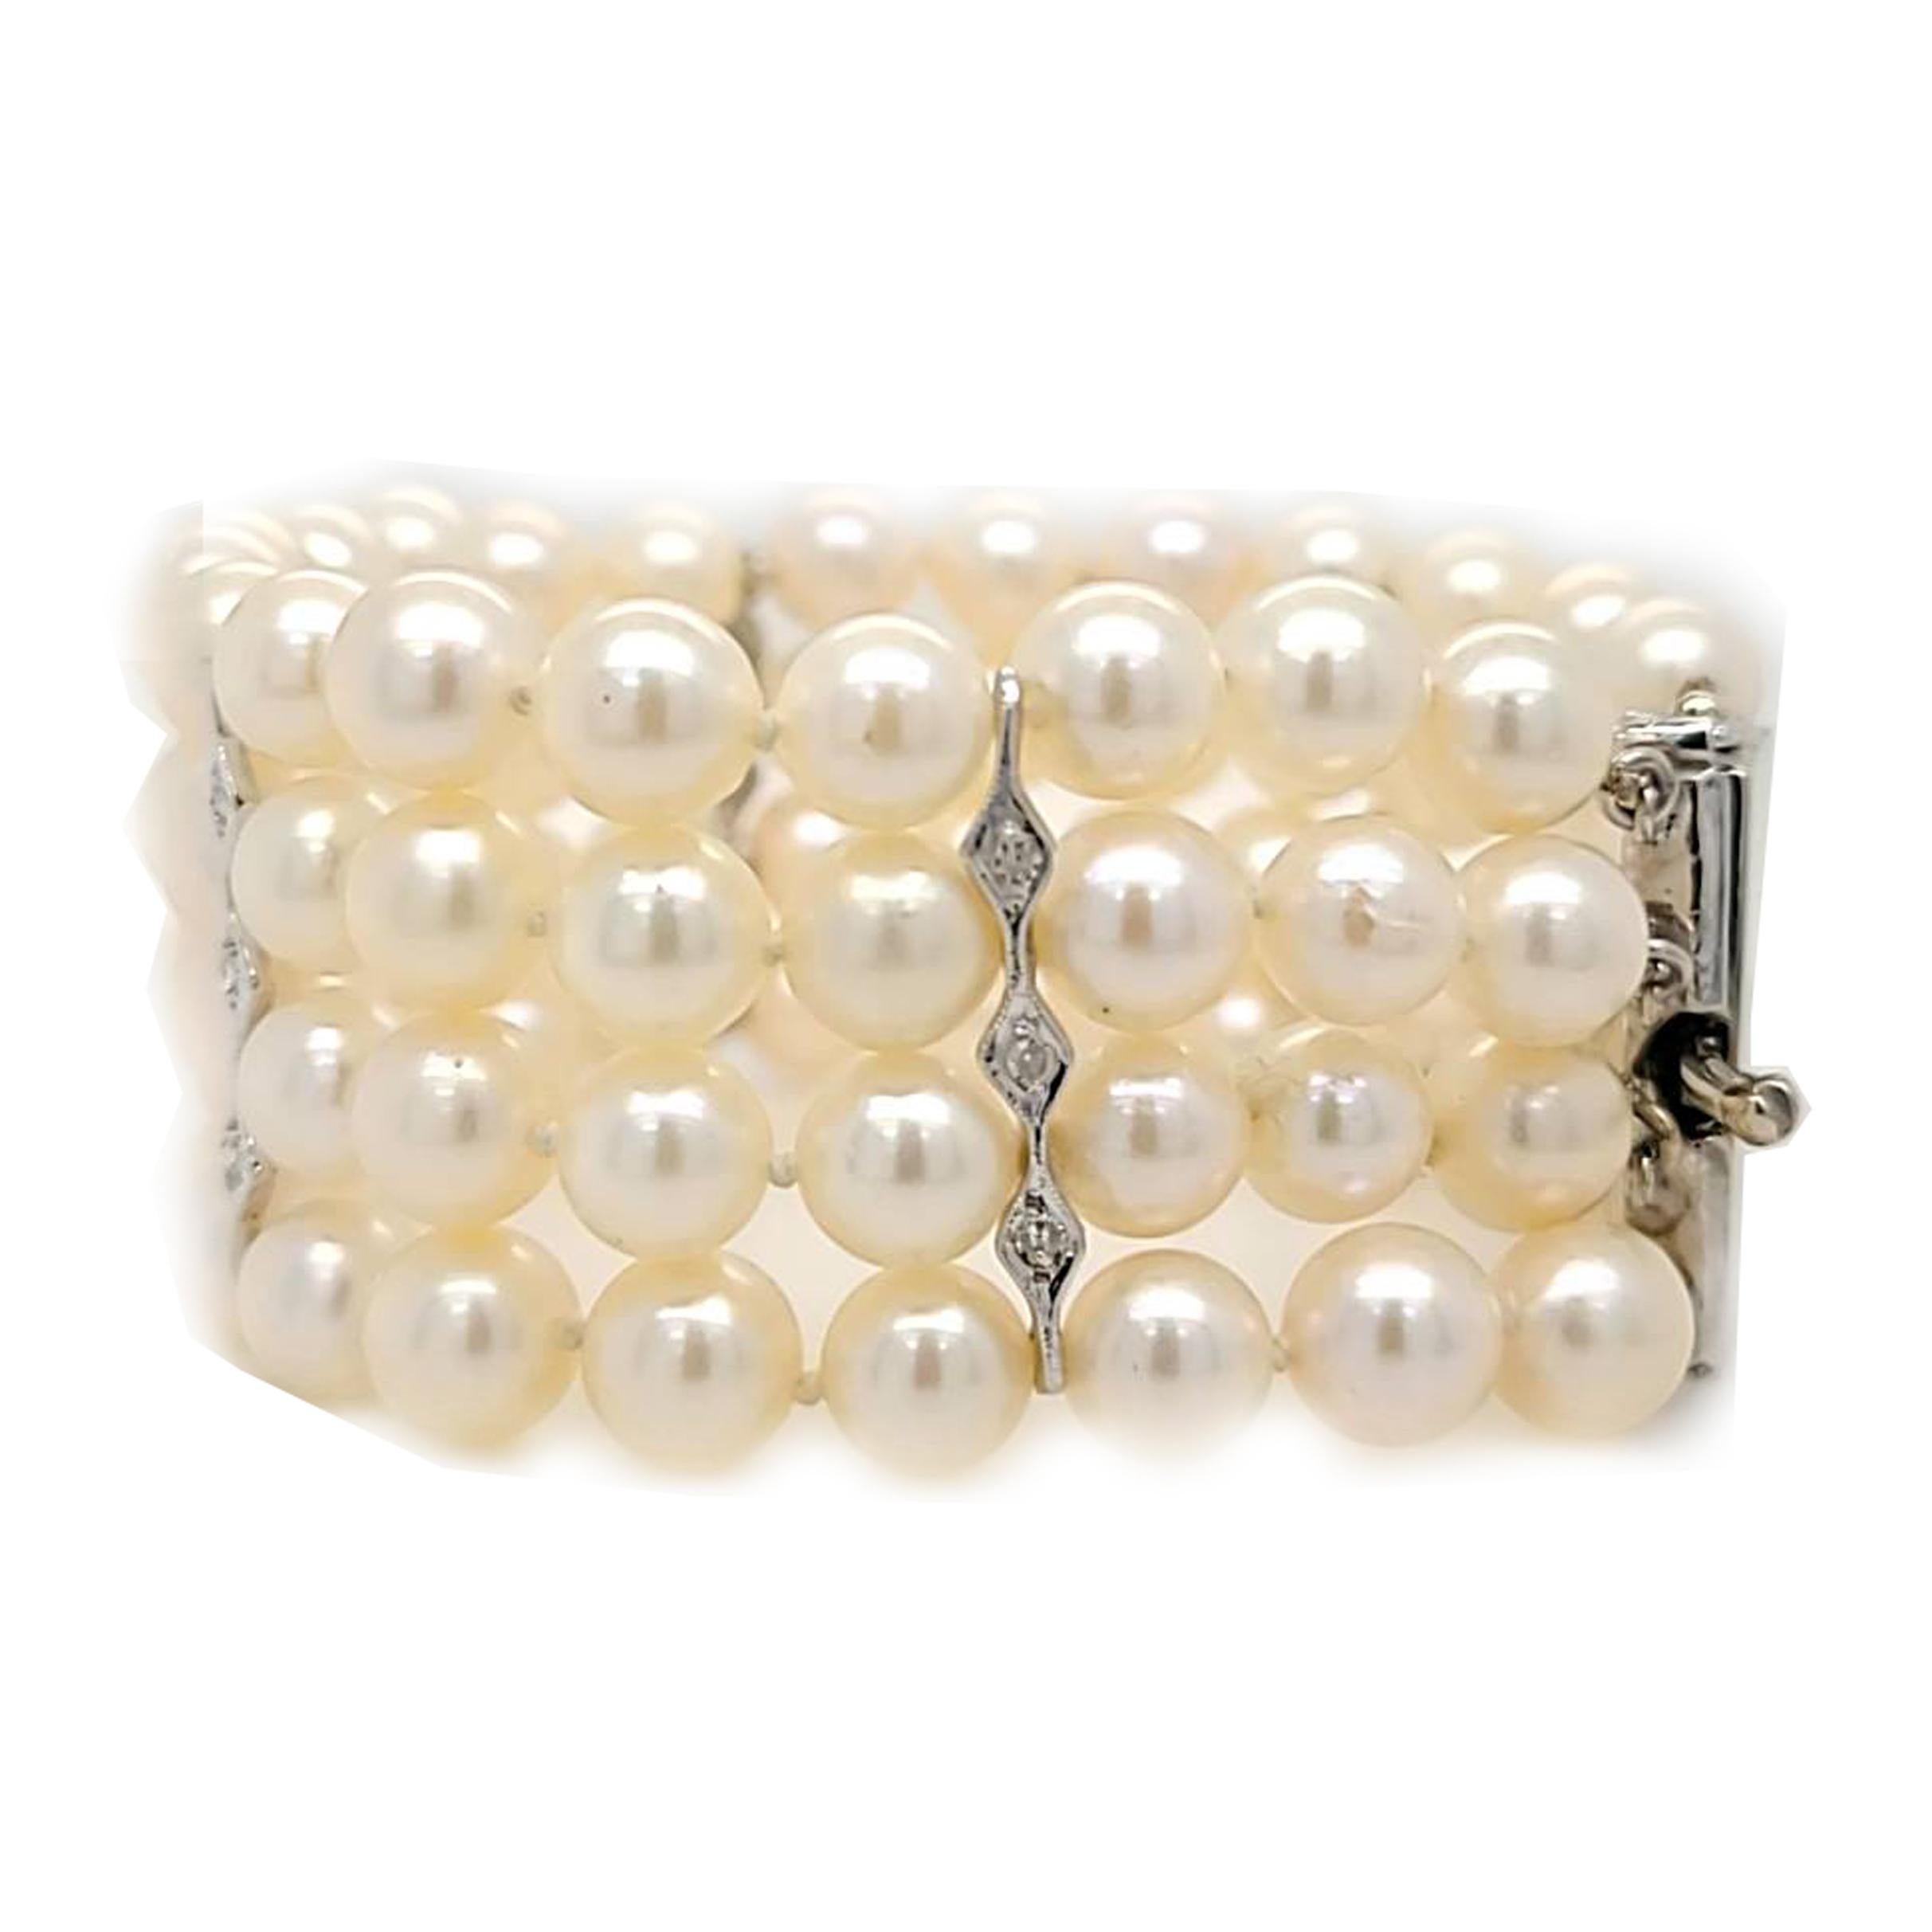 4 Row Pearl and Diamond Bracelet  In Good Condition For Sale In Coral Gables, FL